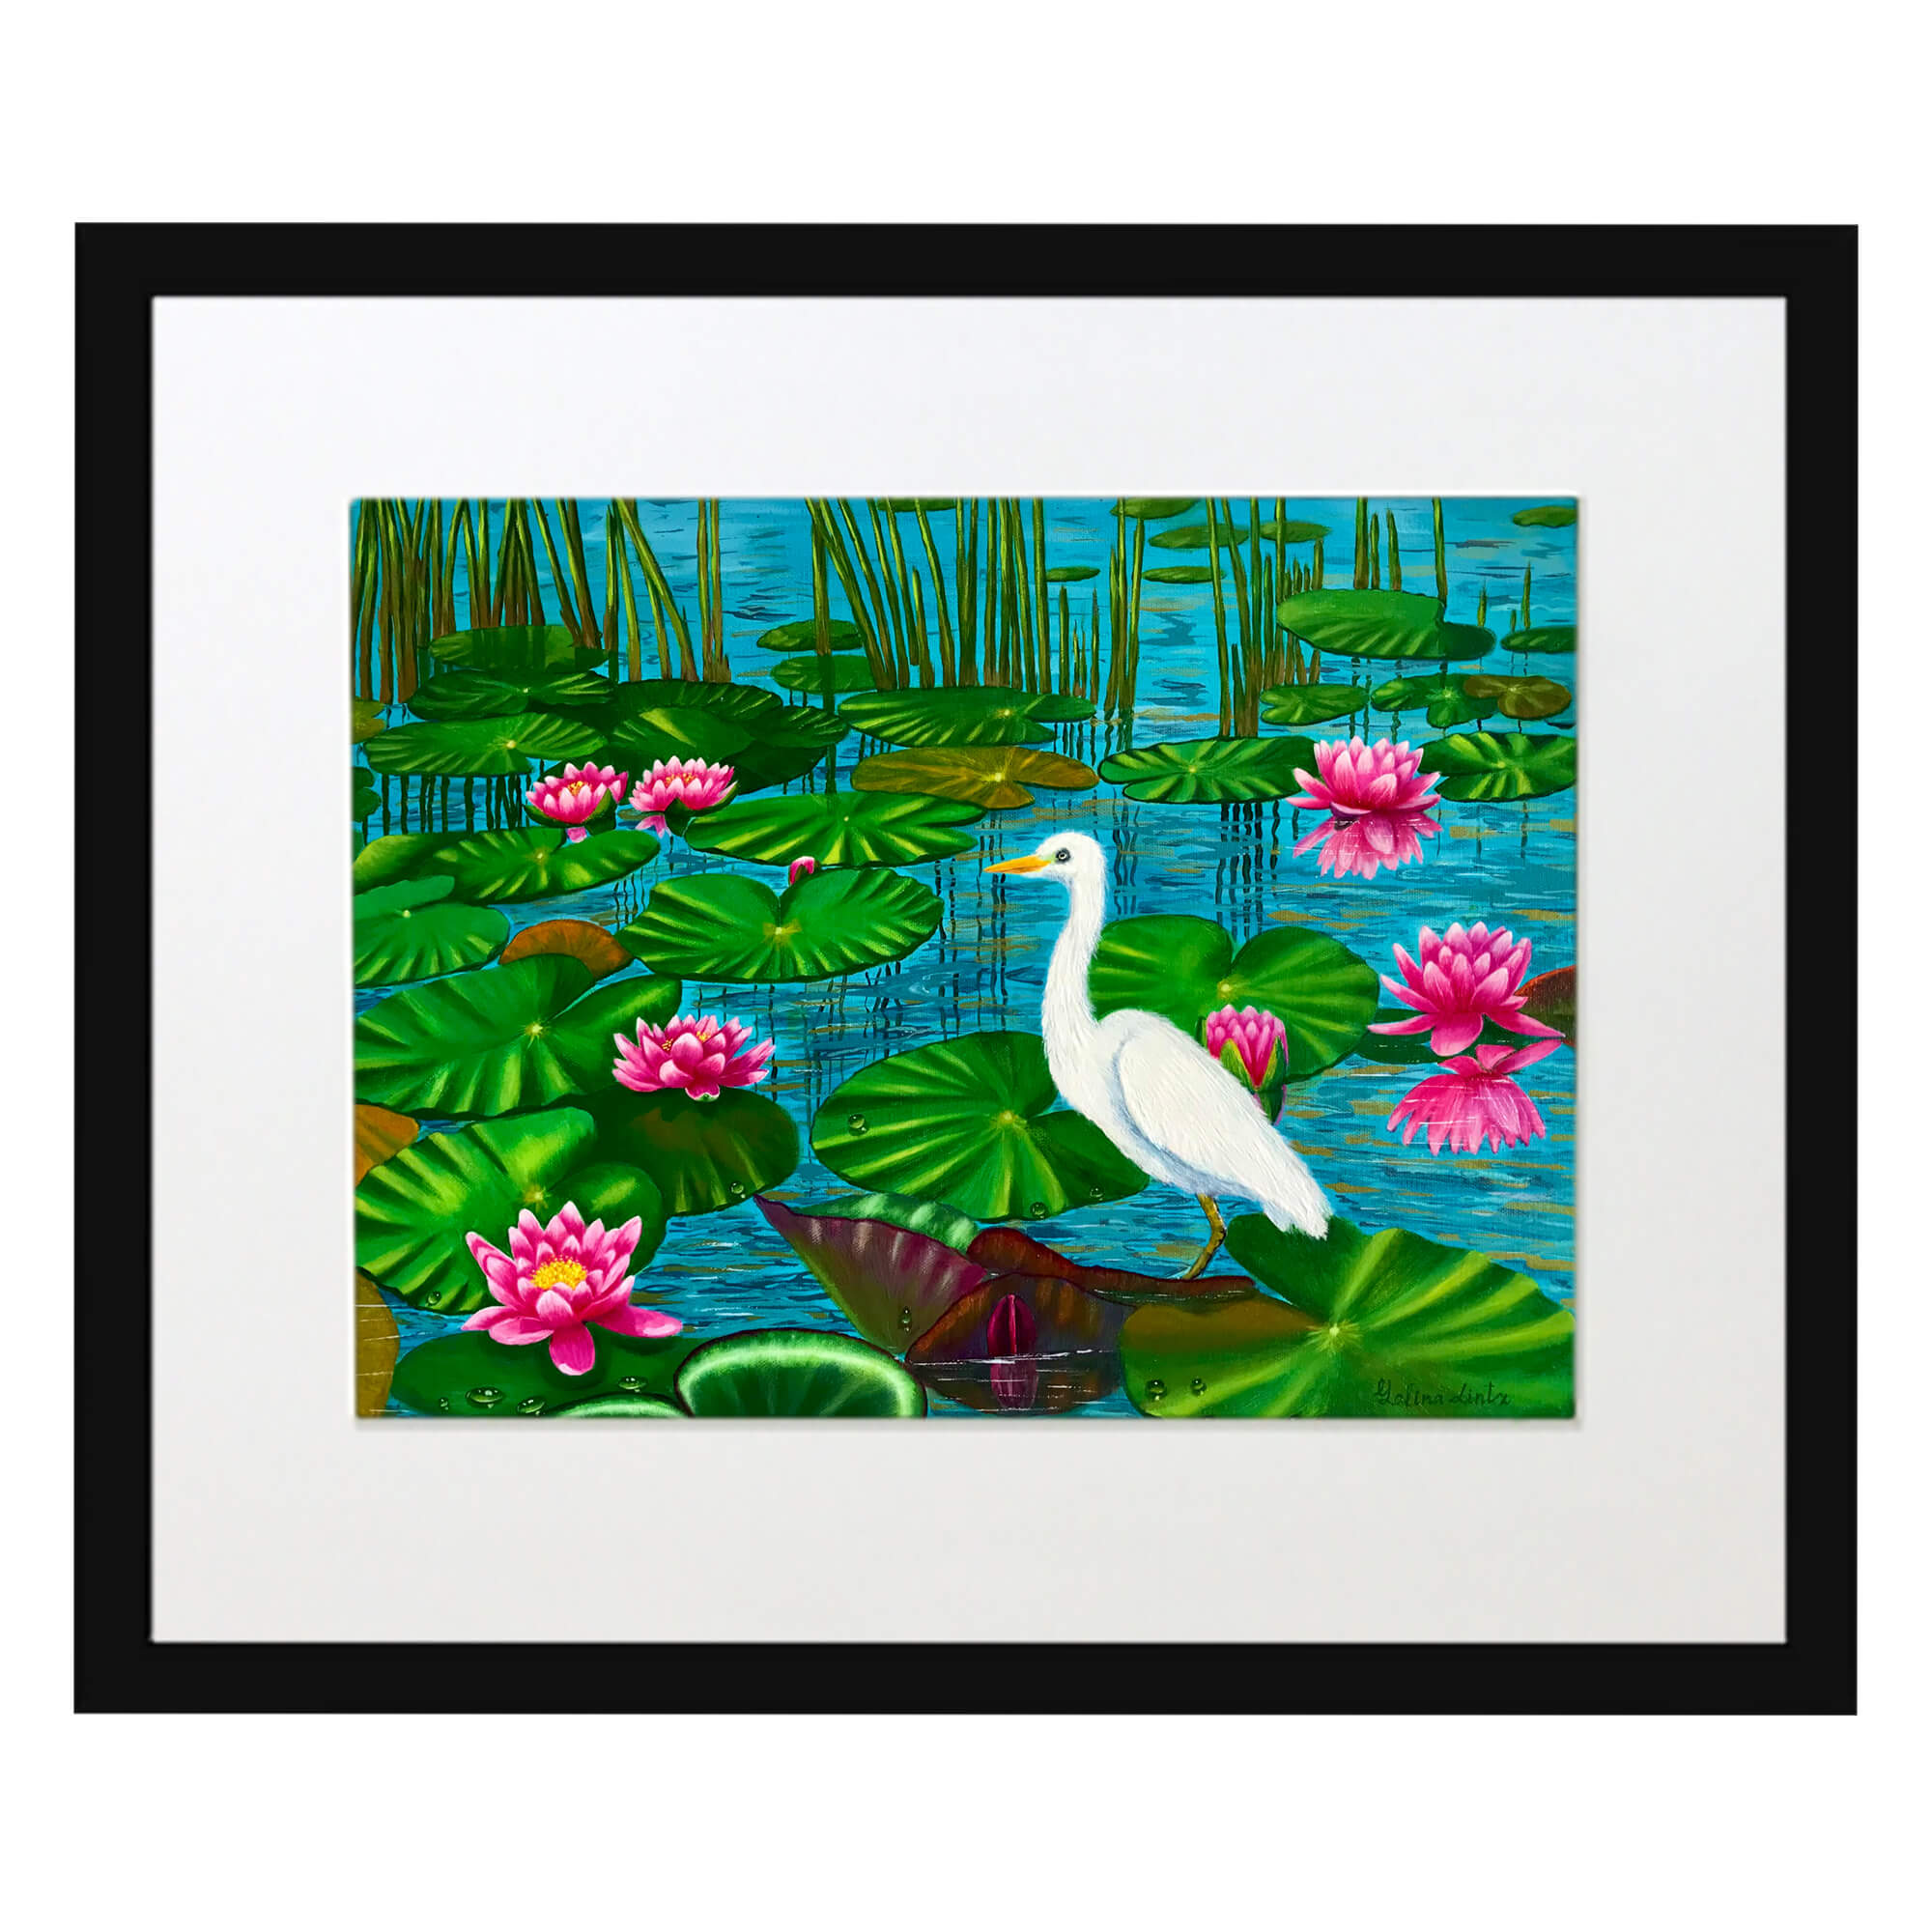 Matted art print with black frame showcasing lily pads by hawaii artist Galina Lintz